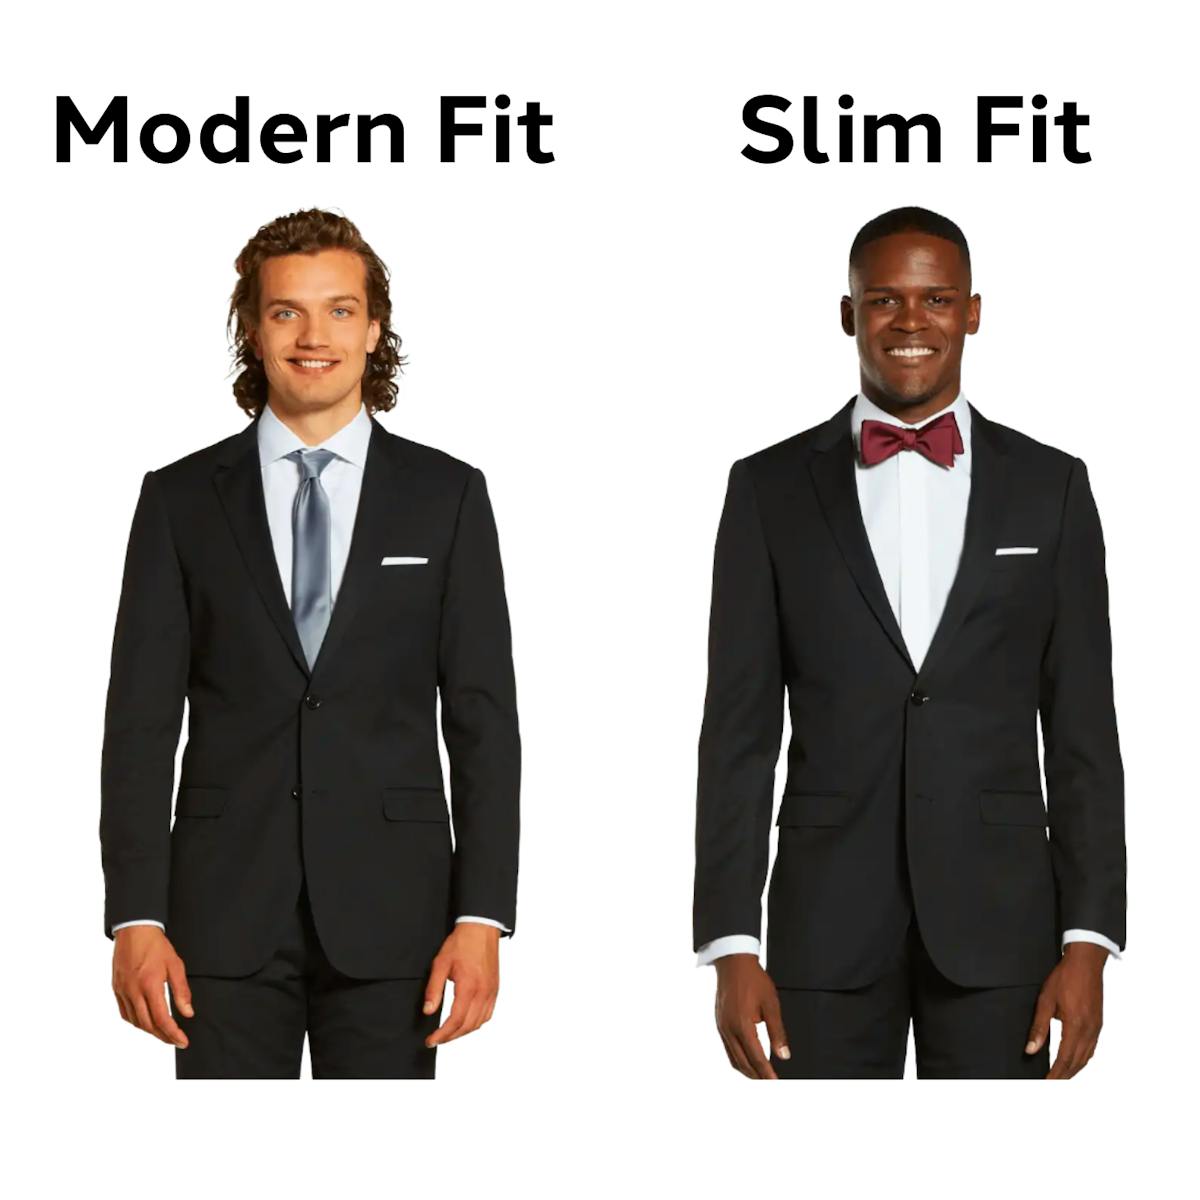 Tailored Fit vs Tapered Fit - What's The Difference?